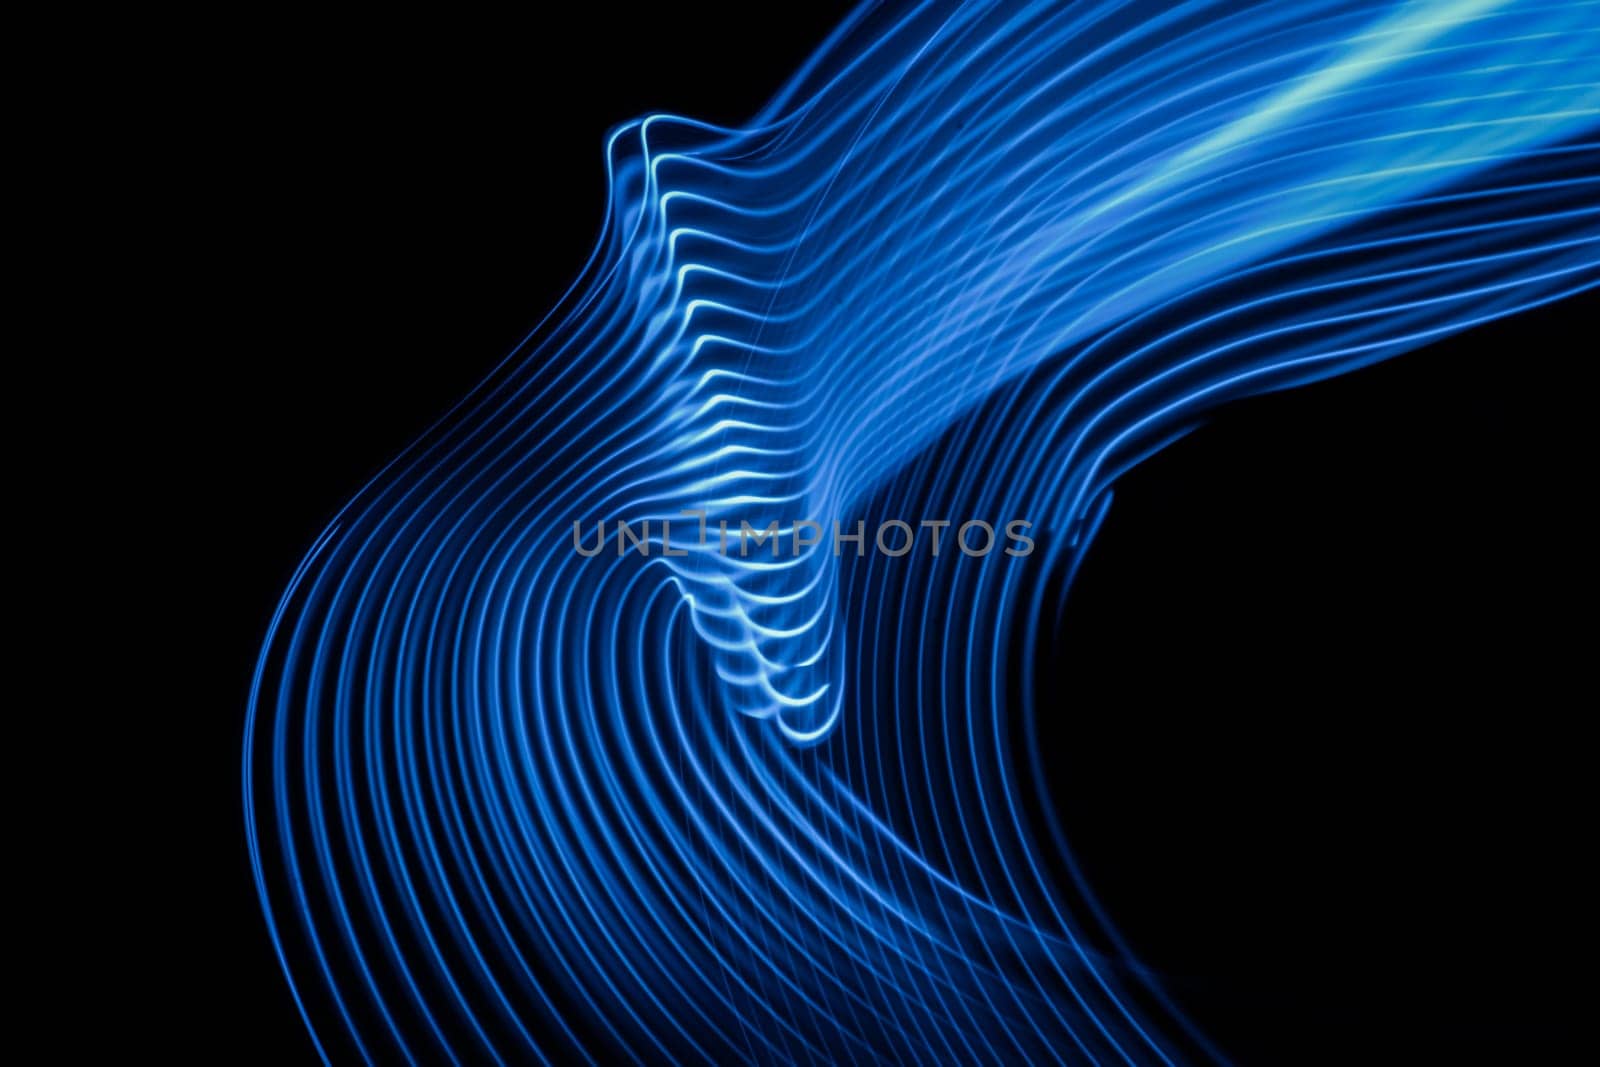 Abstract technology background of long exposure neon light stripes on black. High quality photo